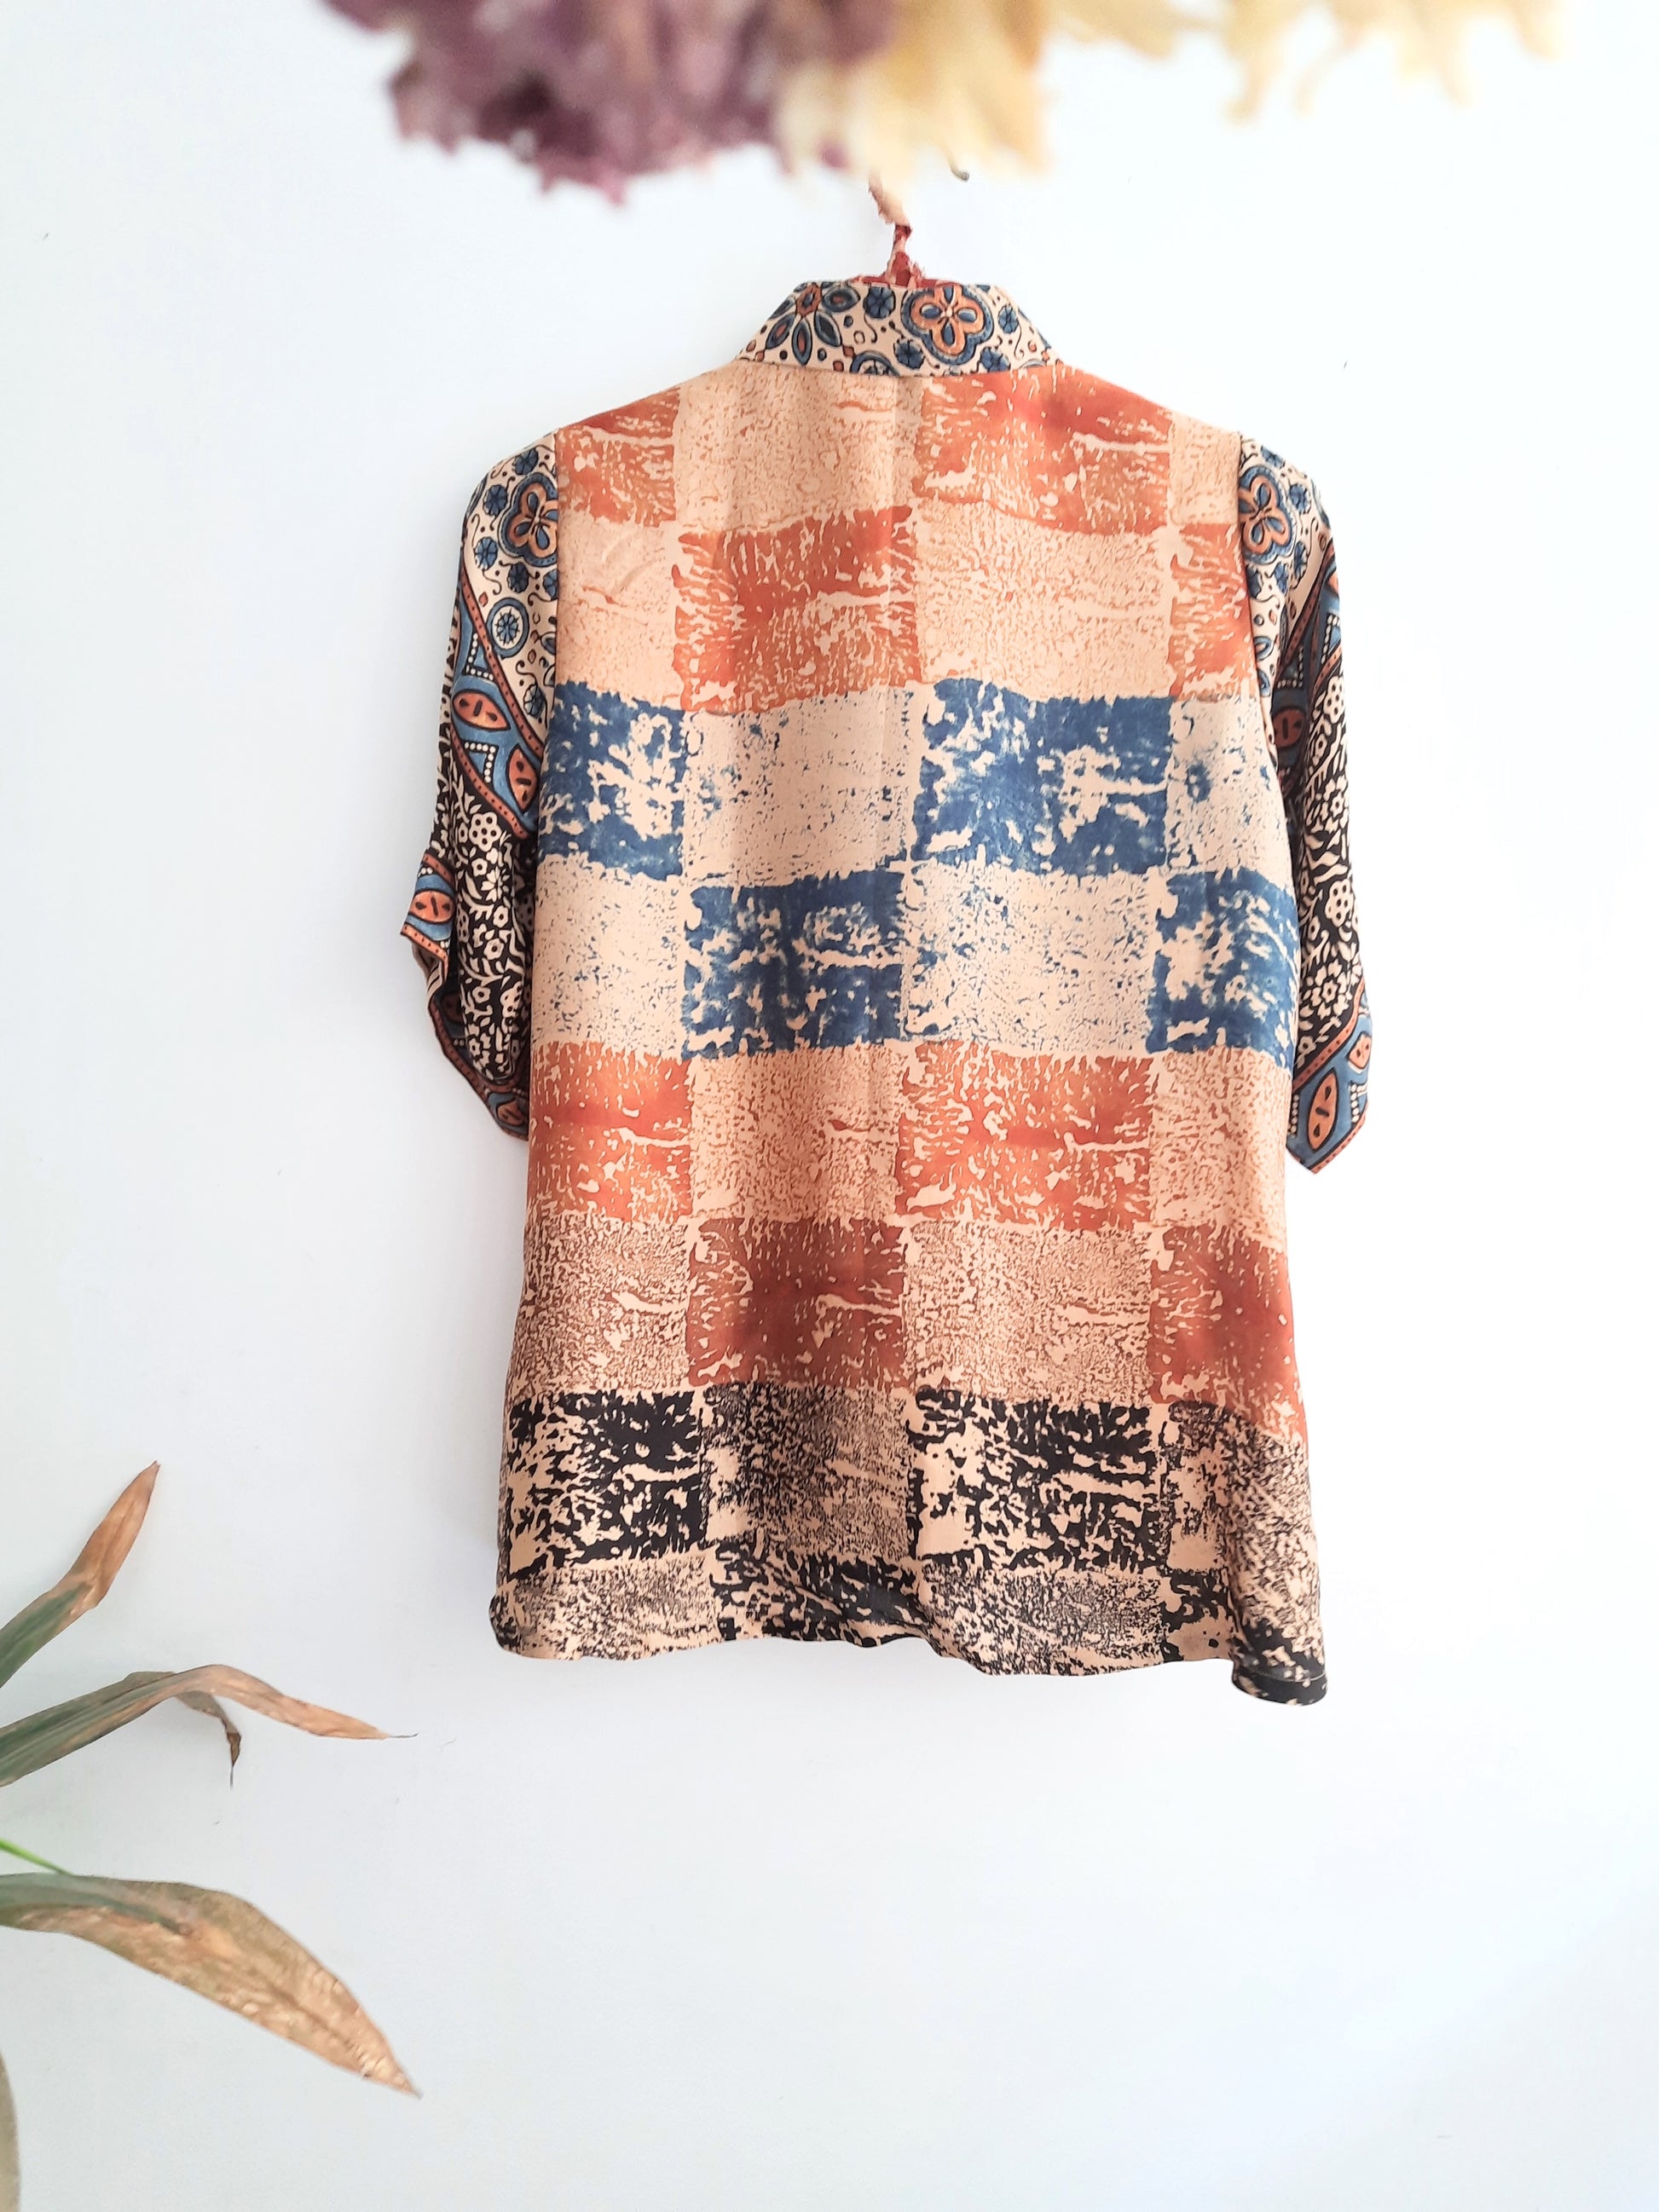 "Image: A woman wearing Earth's Palette Luxurious Modal Silk Shirt, featuring a unique abstract print in peach, indigo, and black hues. This shirt exudes elegance and comfort, perfect for standing out with confidence all day long."